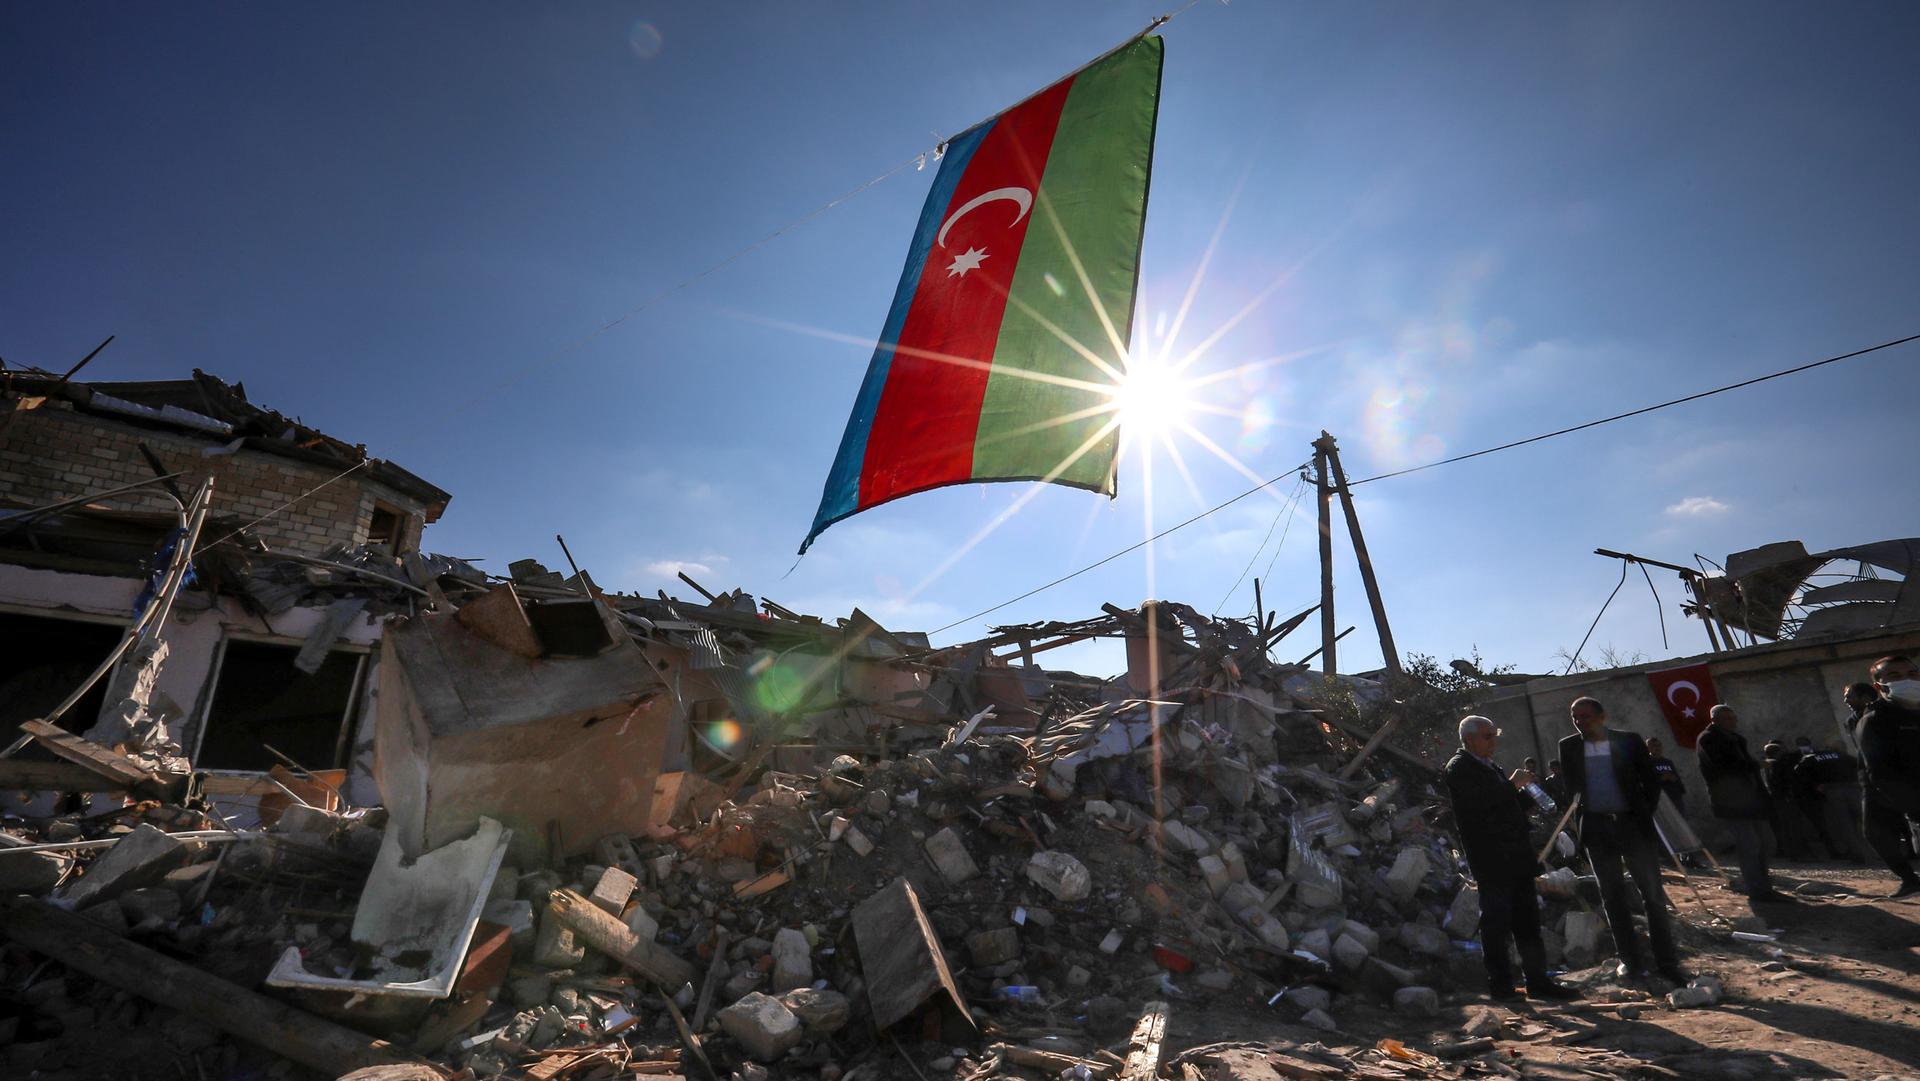 Azerbaijan's national flag is shown flying over destroyed houses with bright rays of sunlight backlighting it.